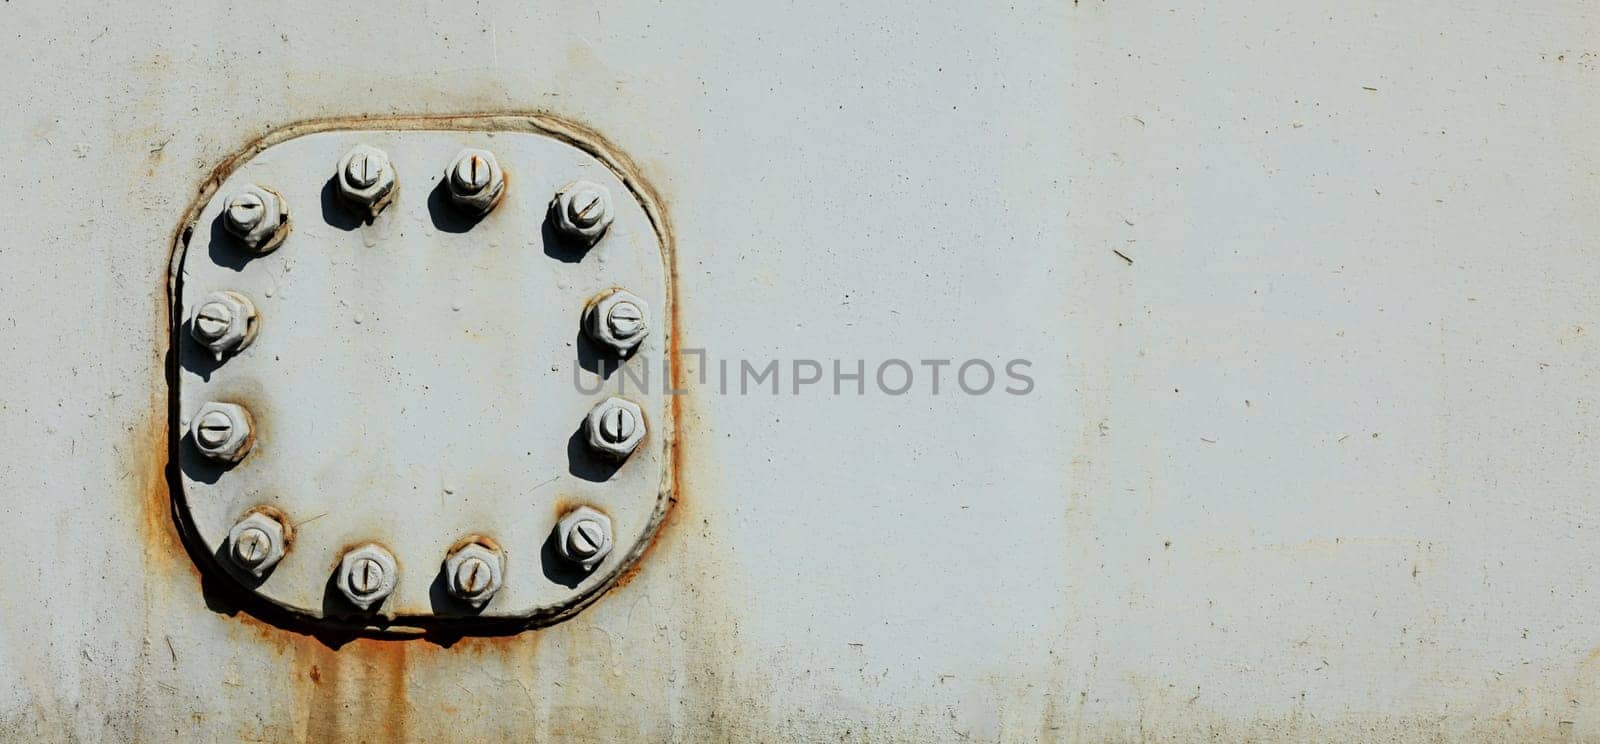 Large nuts and bolts on gray steel plate of rail bridge, lit by bright sun. Abstract industrial background, space for text on the right.